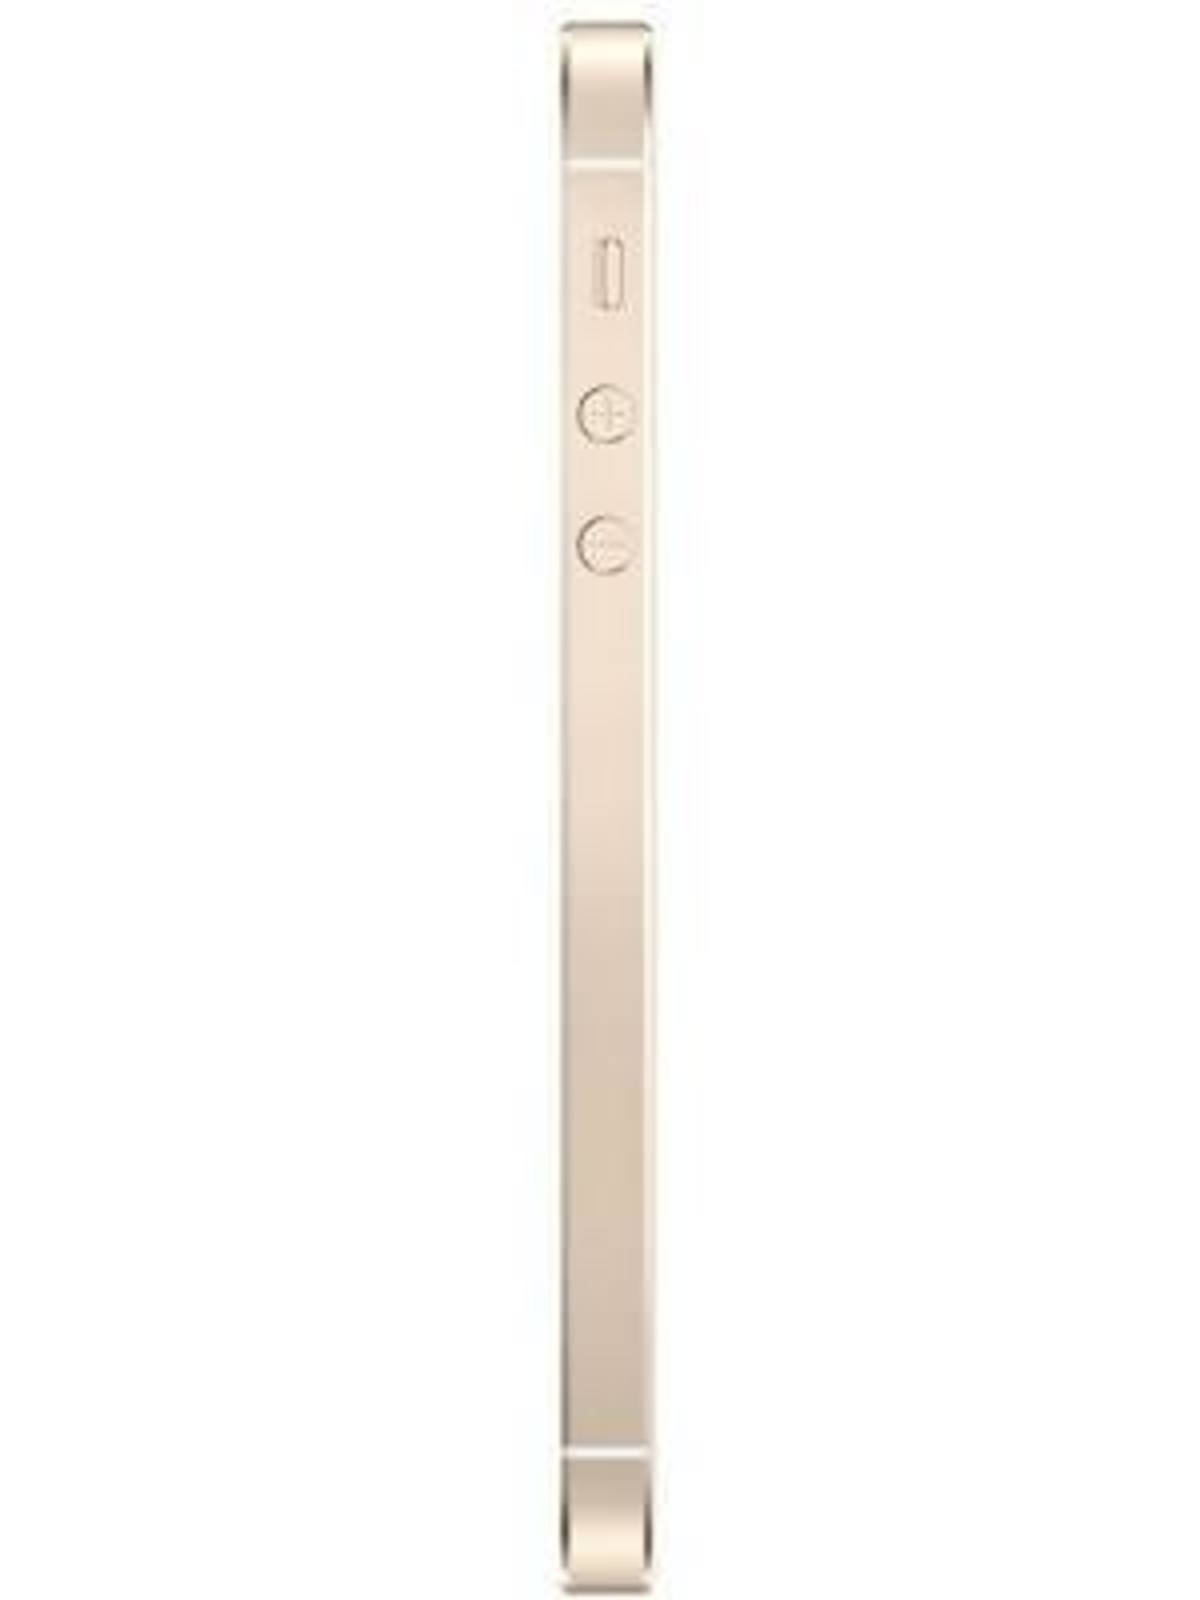 Apple iPhone 5s 64GB Price in India, Full Specifications (2nd Aug 2022) at  Gadgets Now